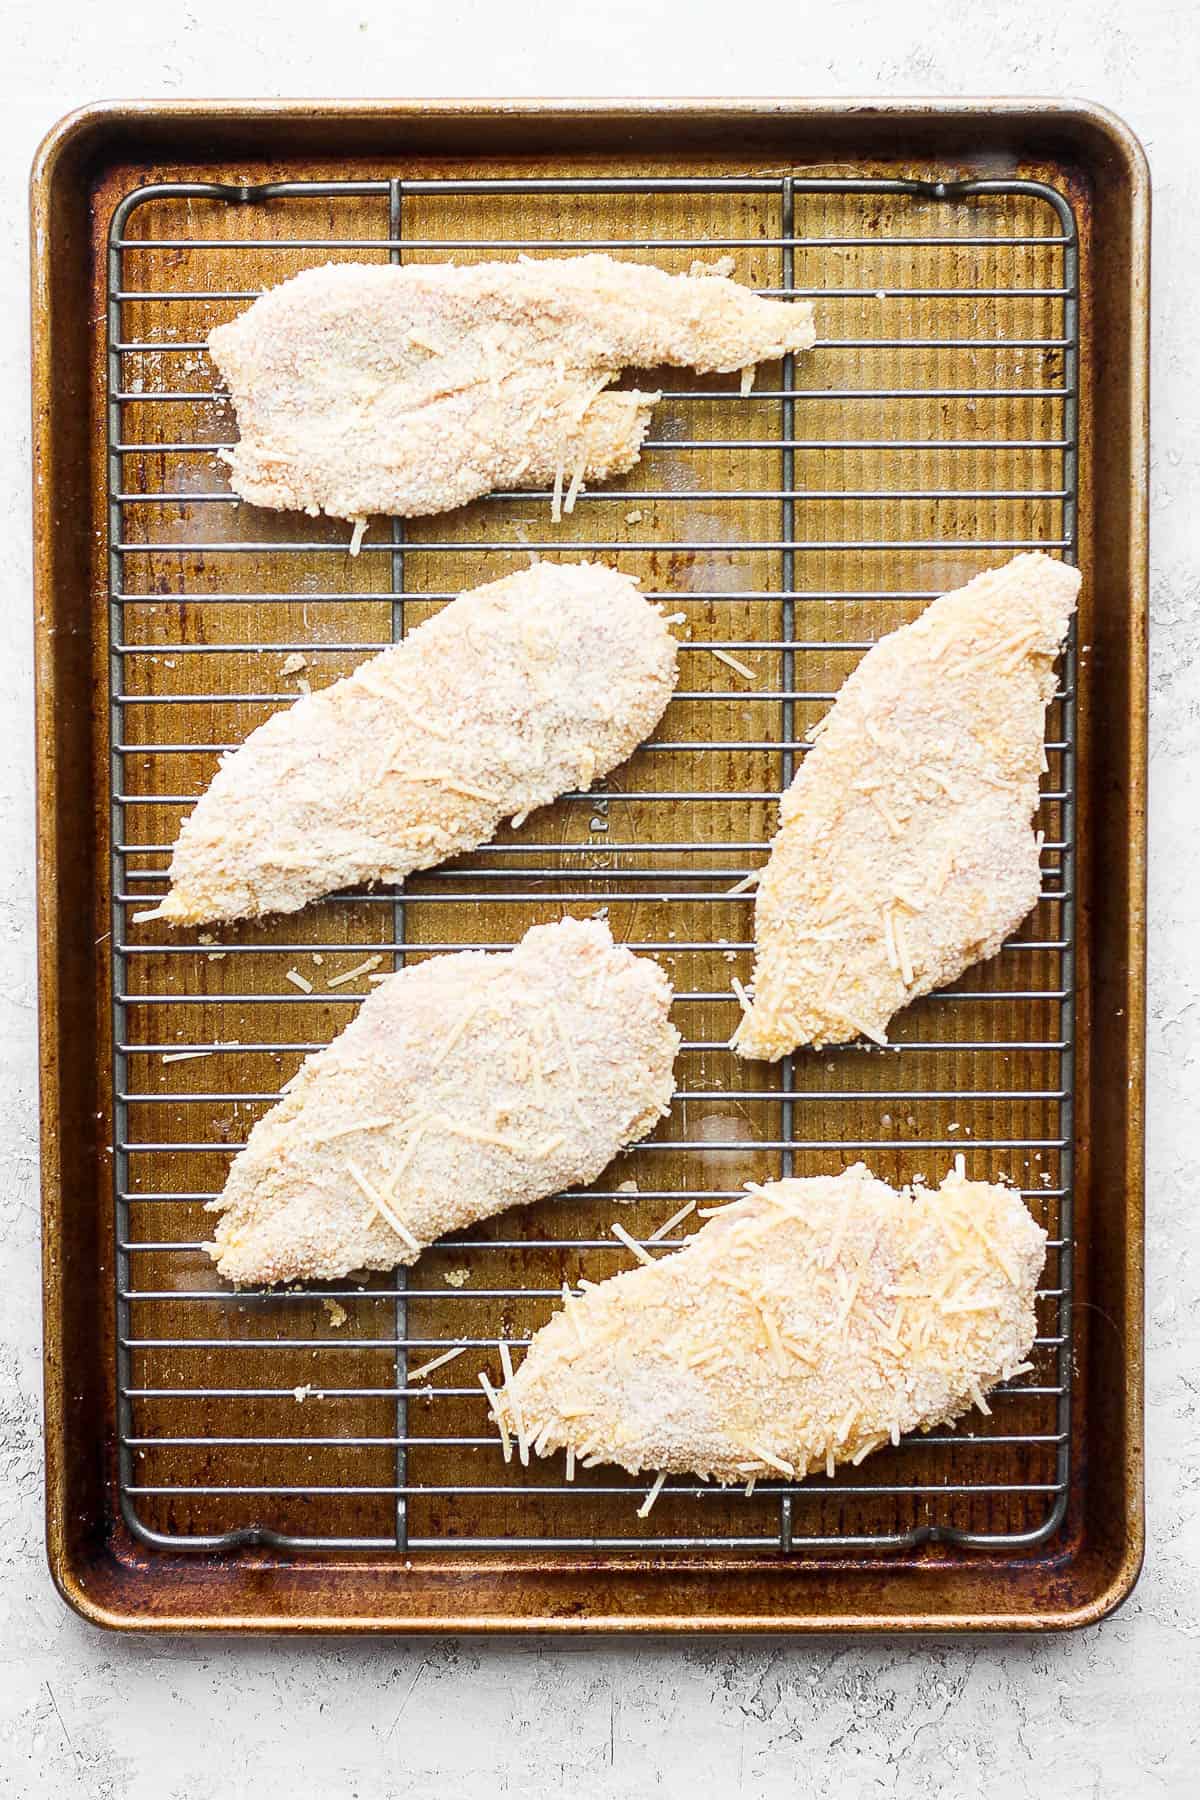 Fully coated chicken cutlets on a wire rack on a baking sheet.